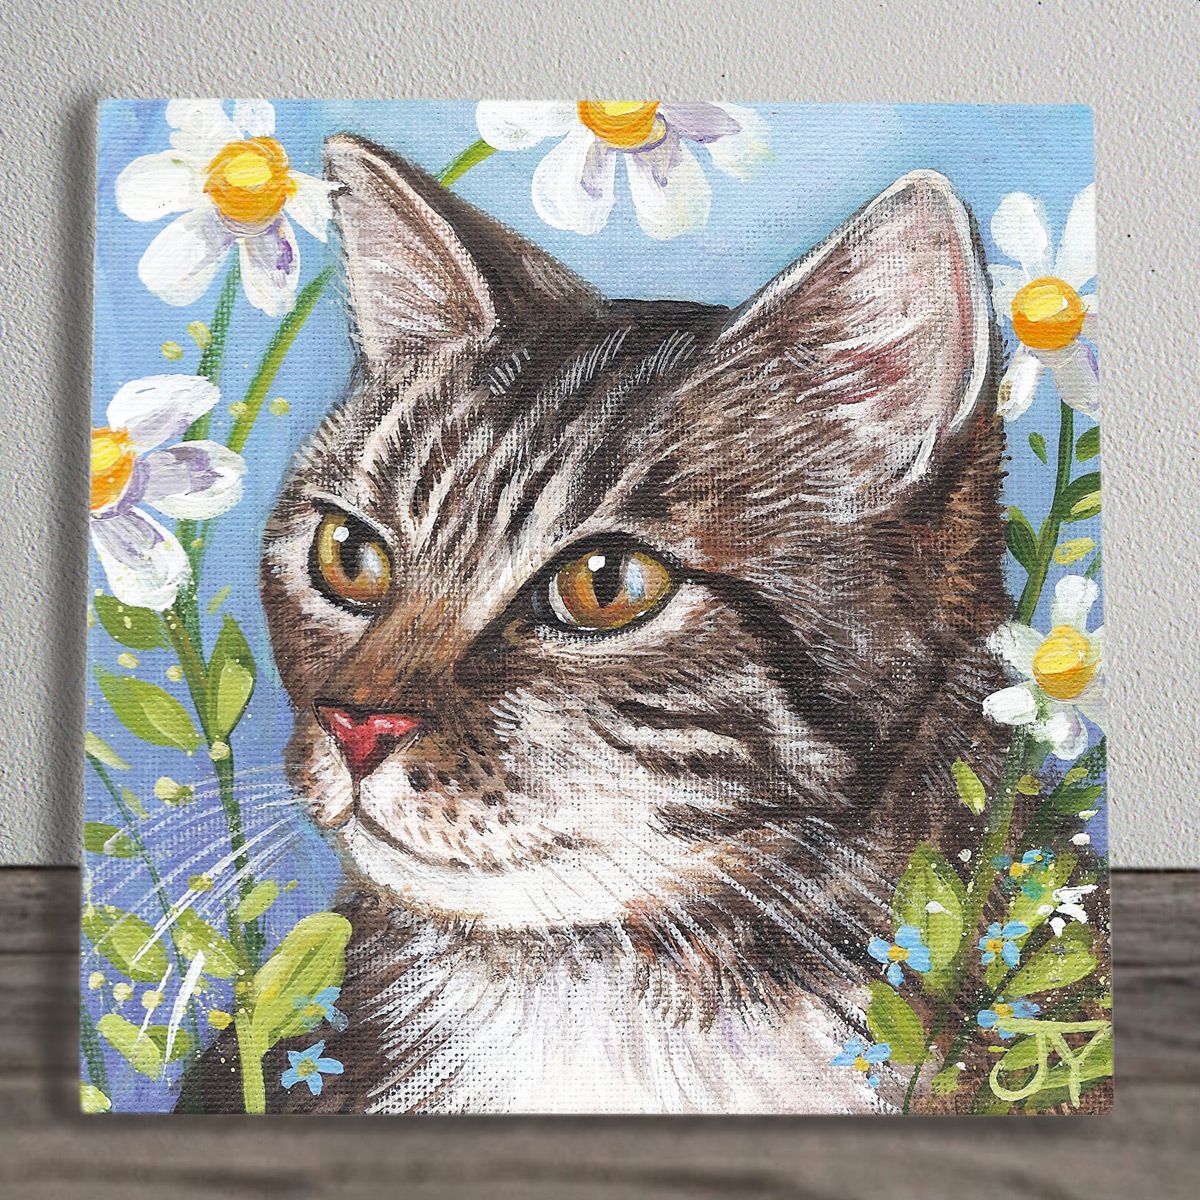 Tabby and White Cat with Flowers Ceramic Wall Art